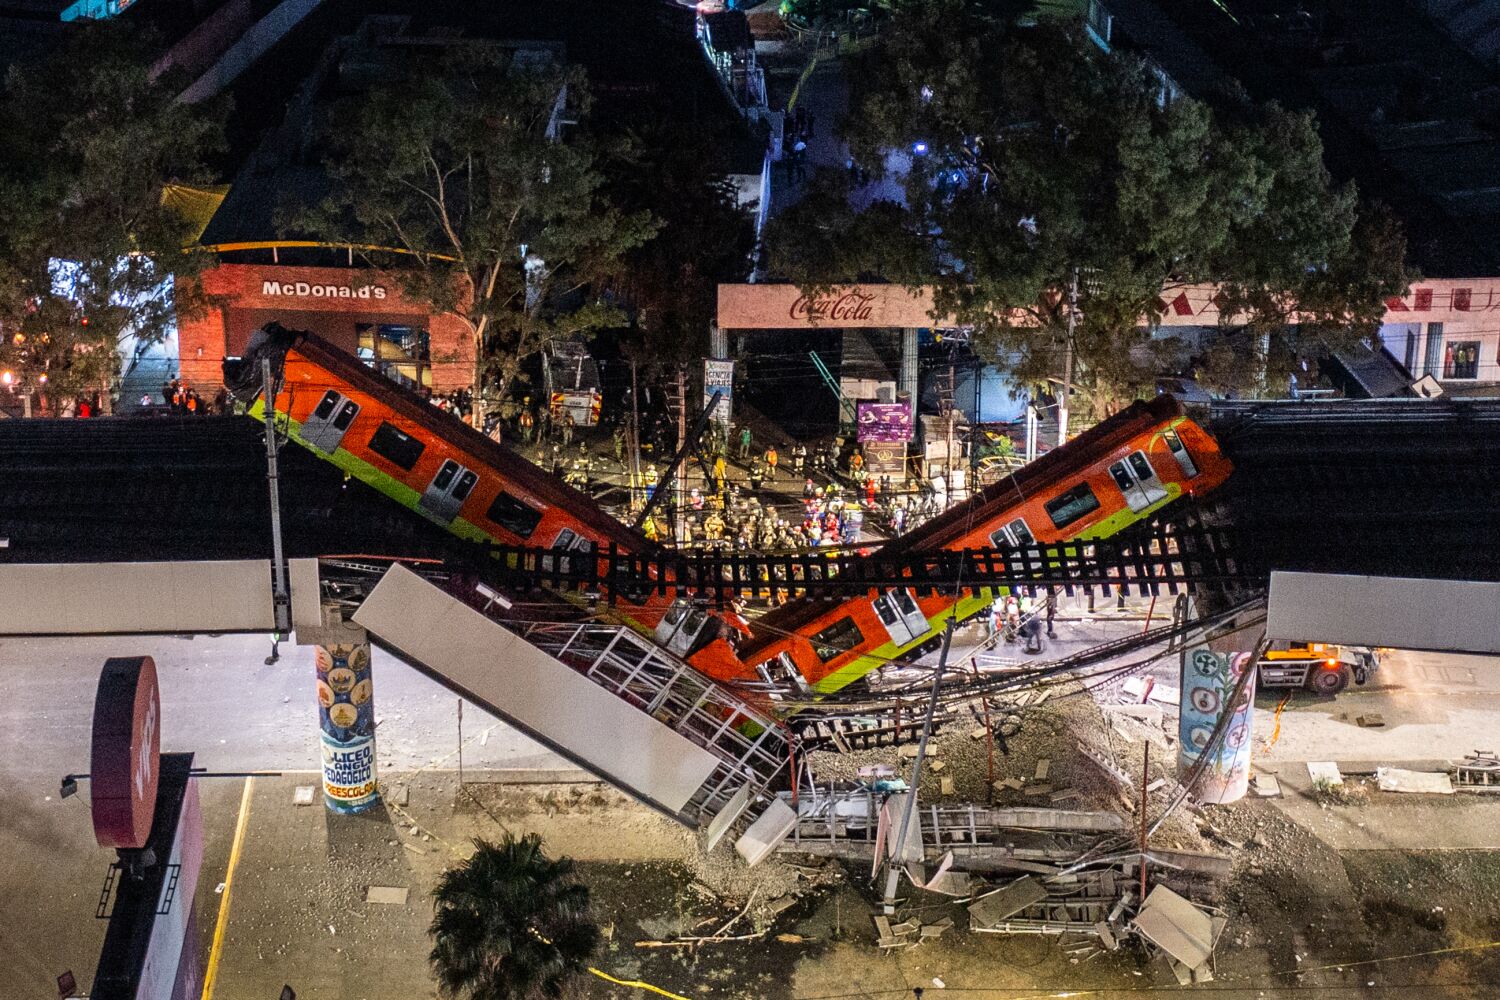 Crashes on Mexico City's neglected subway kill dozens. The mayor's answer? Send in troops